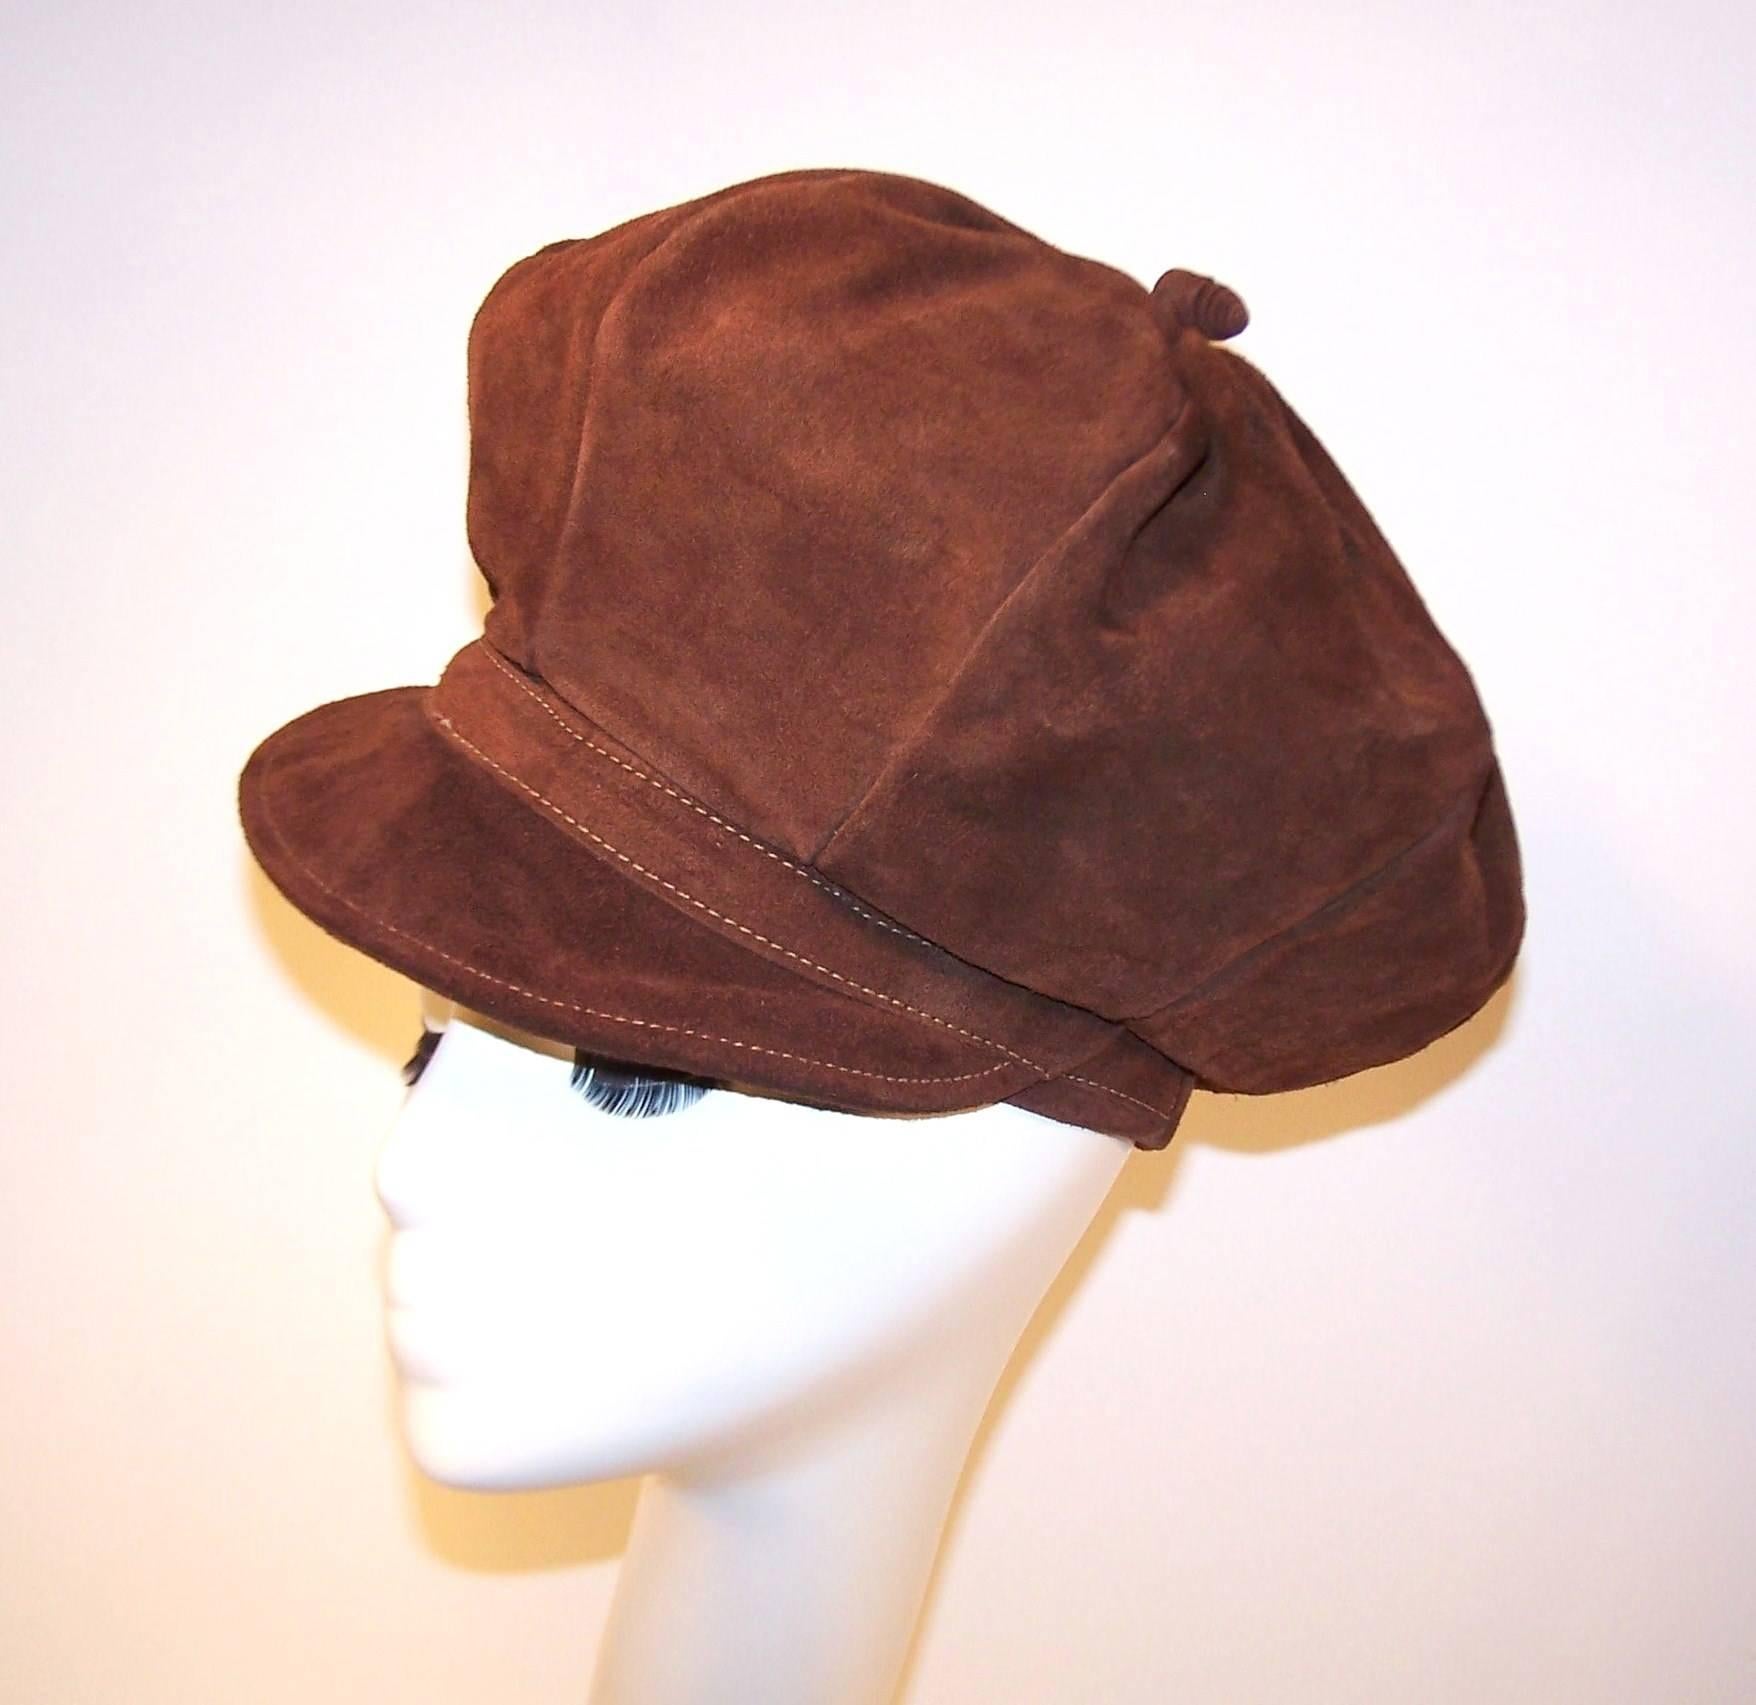 Extra! Extra!  Read all about it! This newsboy cap is reminiscent of the style made popular in the early 1900's with the added exaggeration of a tall crown to lend it a true 1970s bohemian look.  The heavy chocolate brown suede is durable though